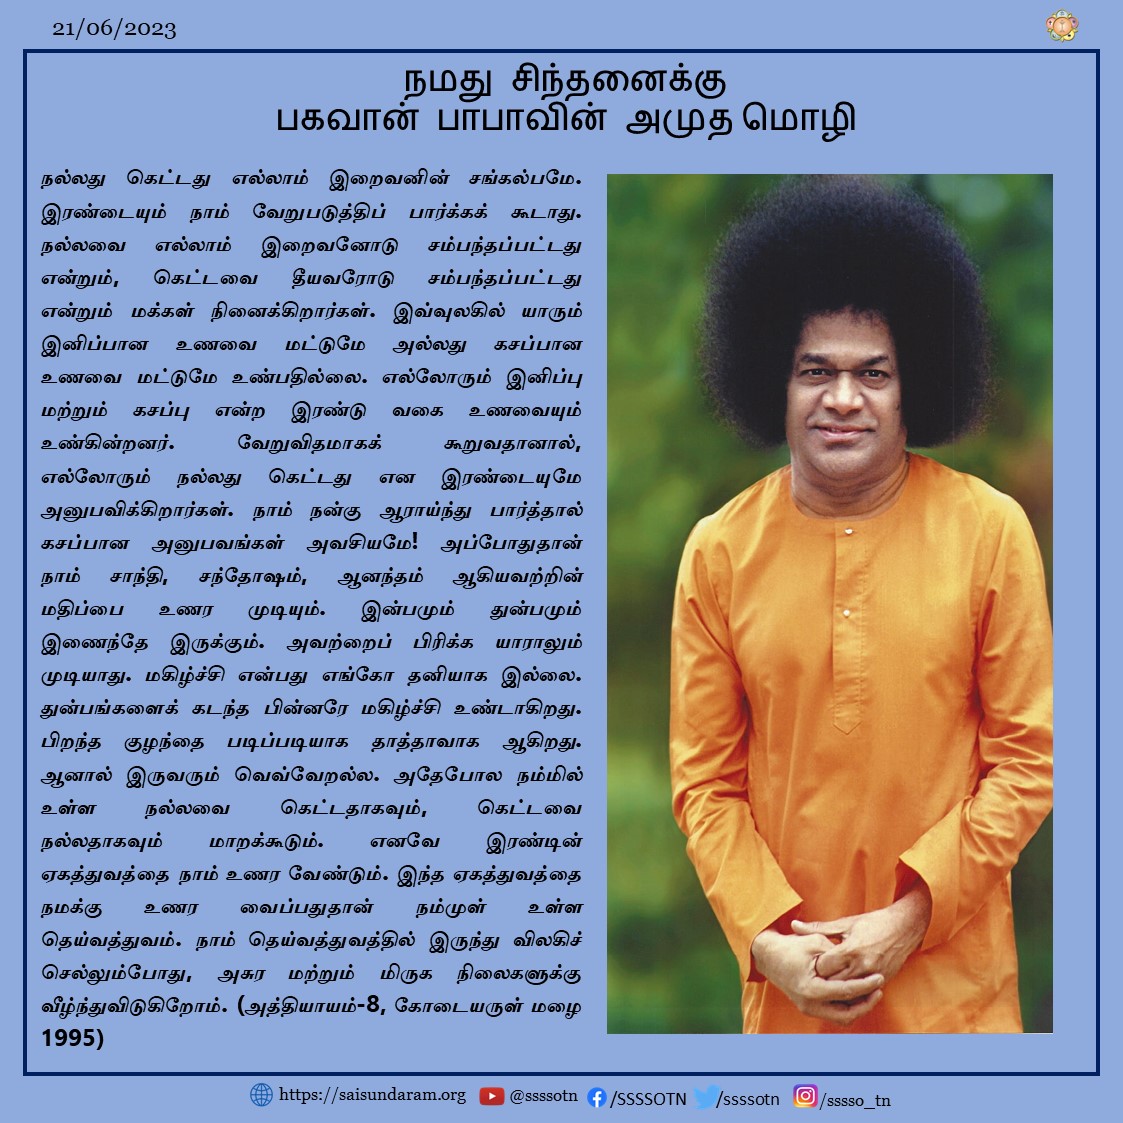 Thought For the Day | 21th June 2023  Our Most Beloved Bhagawan's Divine Message As Written in Prashanthi Nilayam, Puttaparthi   Source - Ch 8 Summer Showers 1995.   #SriSathyaSai #SriSathyaSaibaba #SriSathyaSai #ThoughtforTheDay #Divinemessage